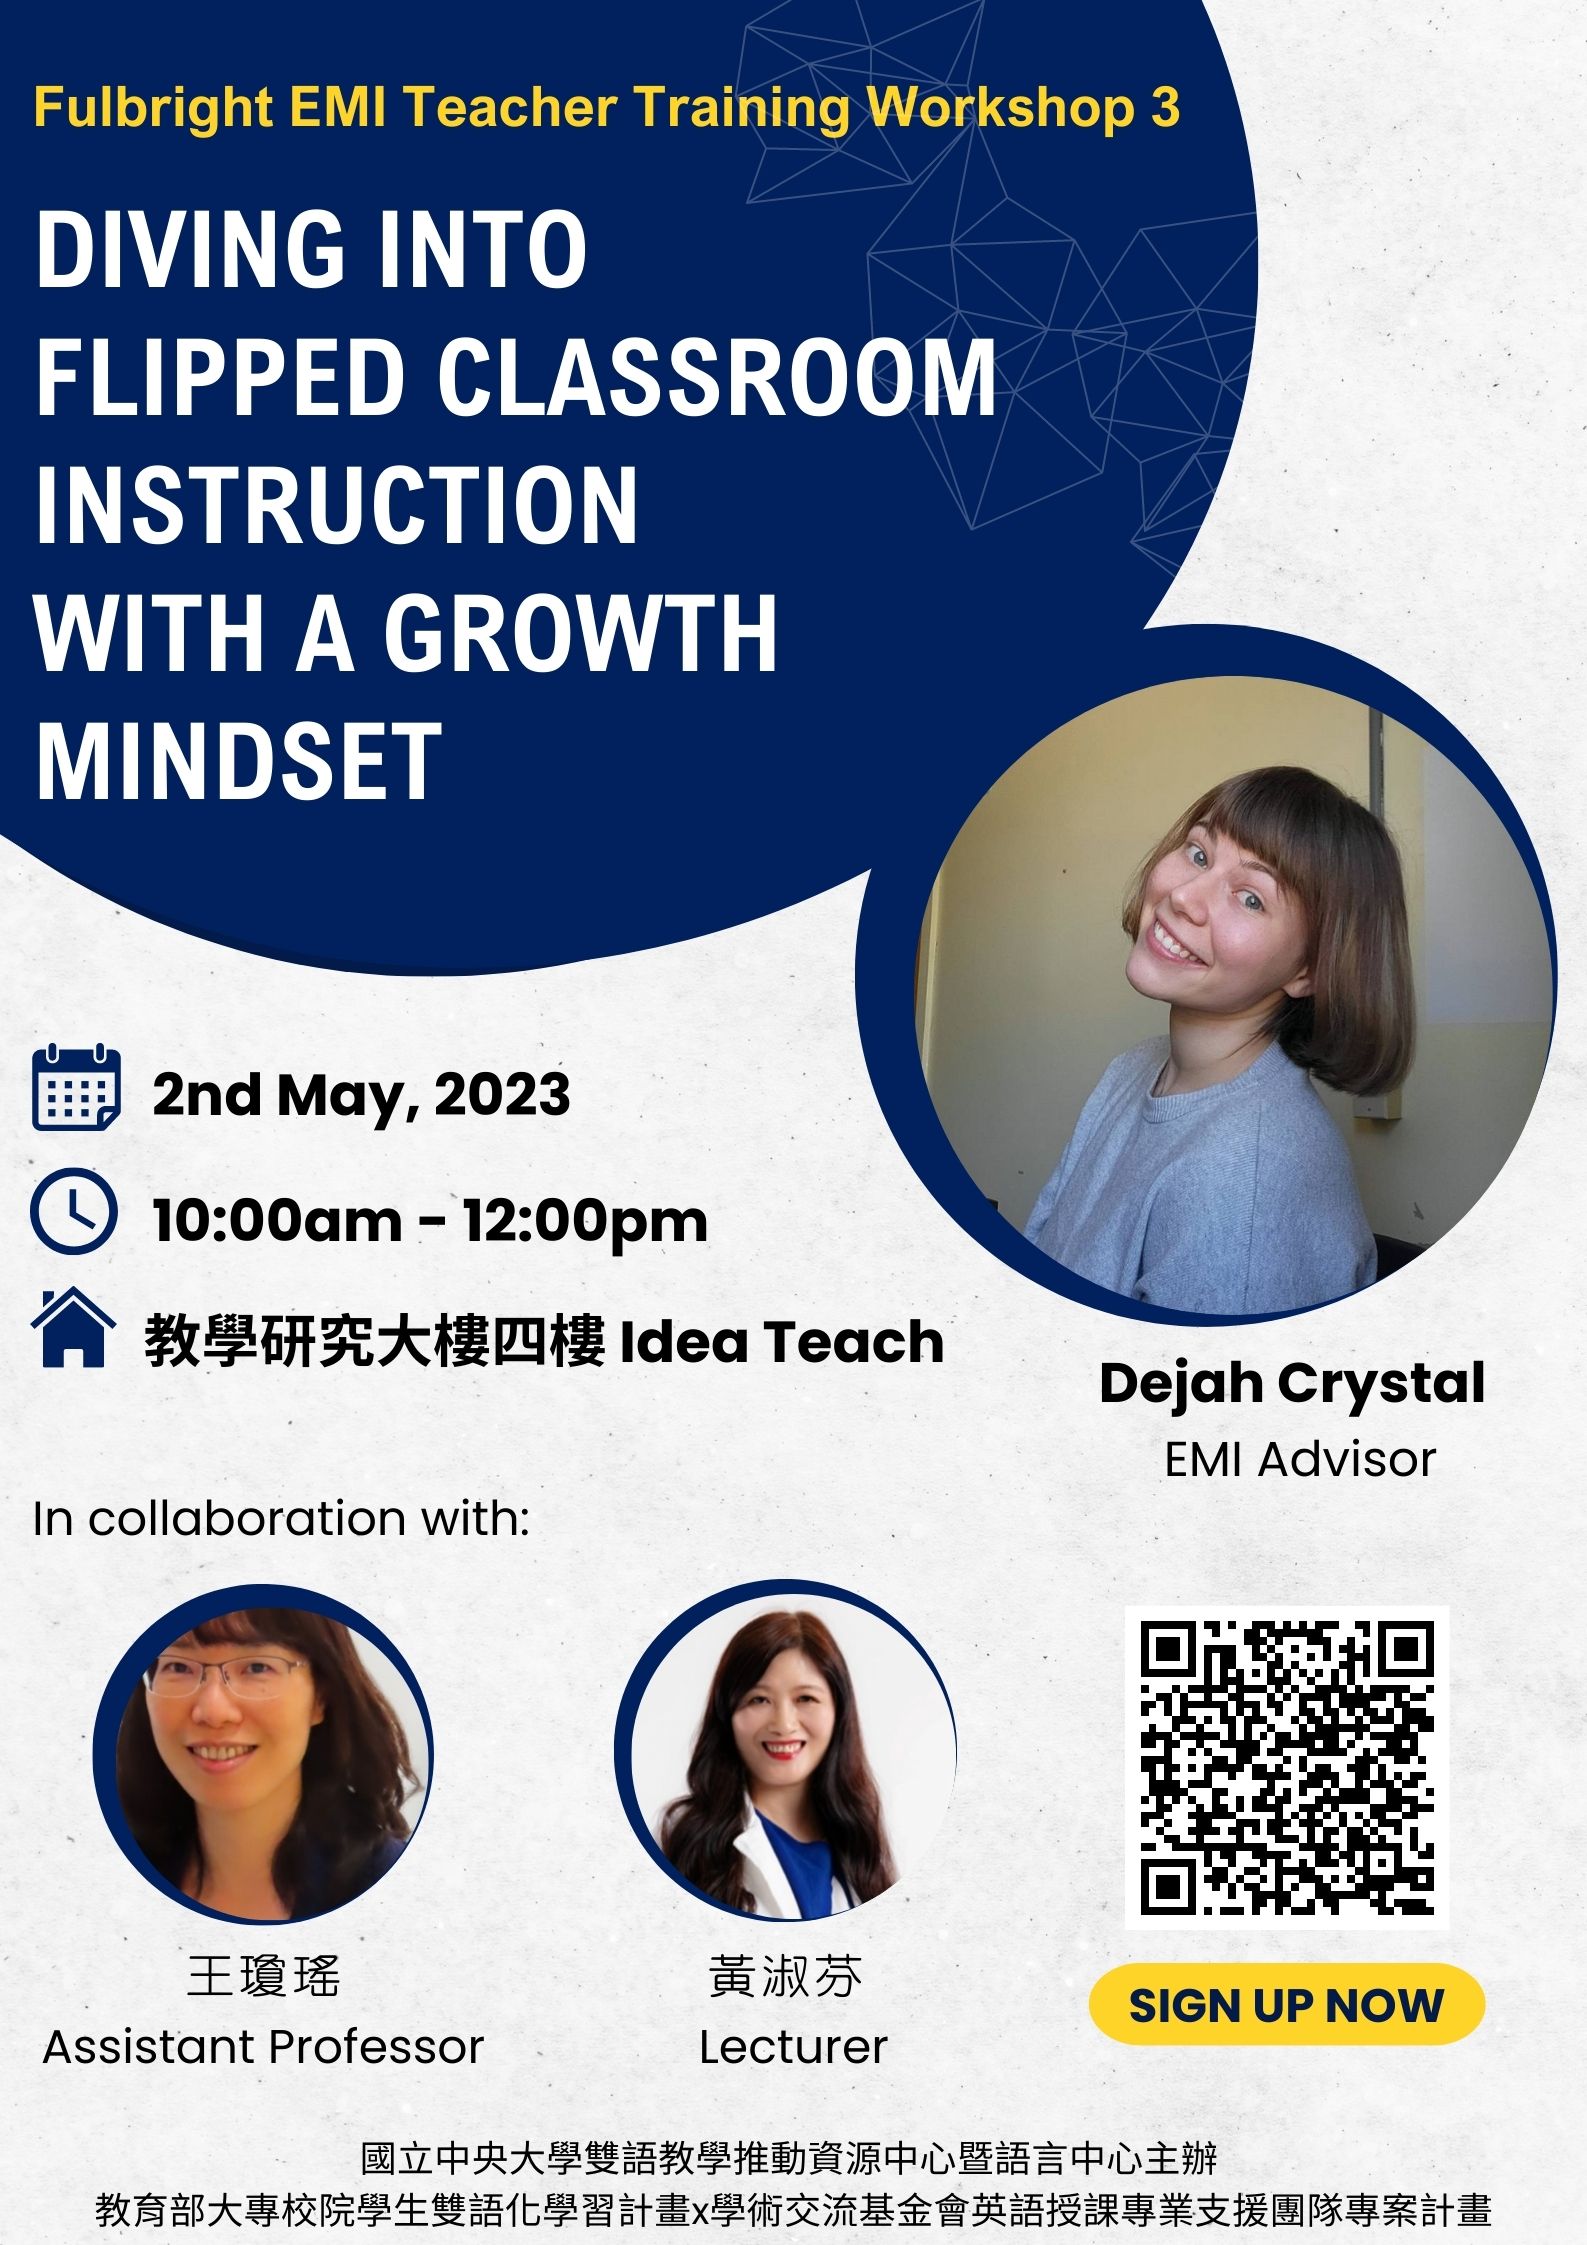 111-2 Semester EMI Teacher Workshop 3 - Diving into Flipped Classroom Instruction with a Growth Mindset